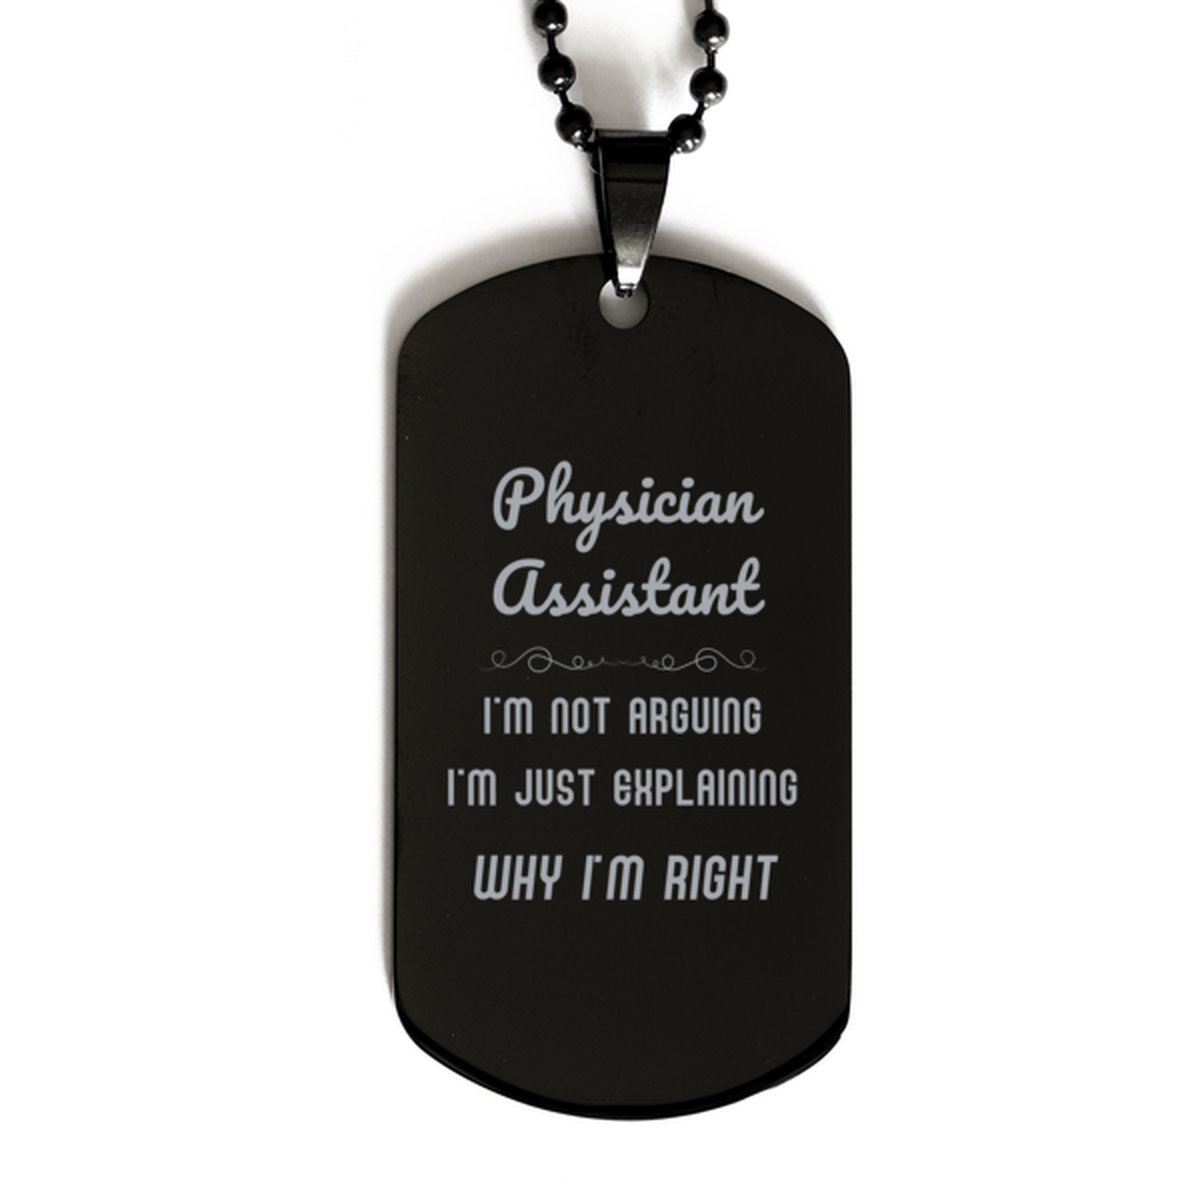 Physician Assistant I'm not Arguing. I'm Just Explaining Why I'm RIGHT Black Dog Tag, Funny Saying Quote Physician Assistant Gifts For Physician Assistant Graduation Birthday Christmas Gifts for Men Women Coworker